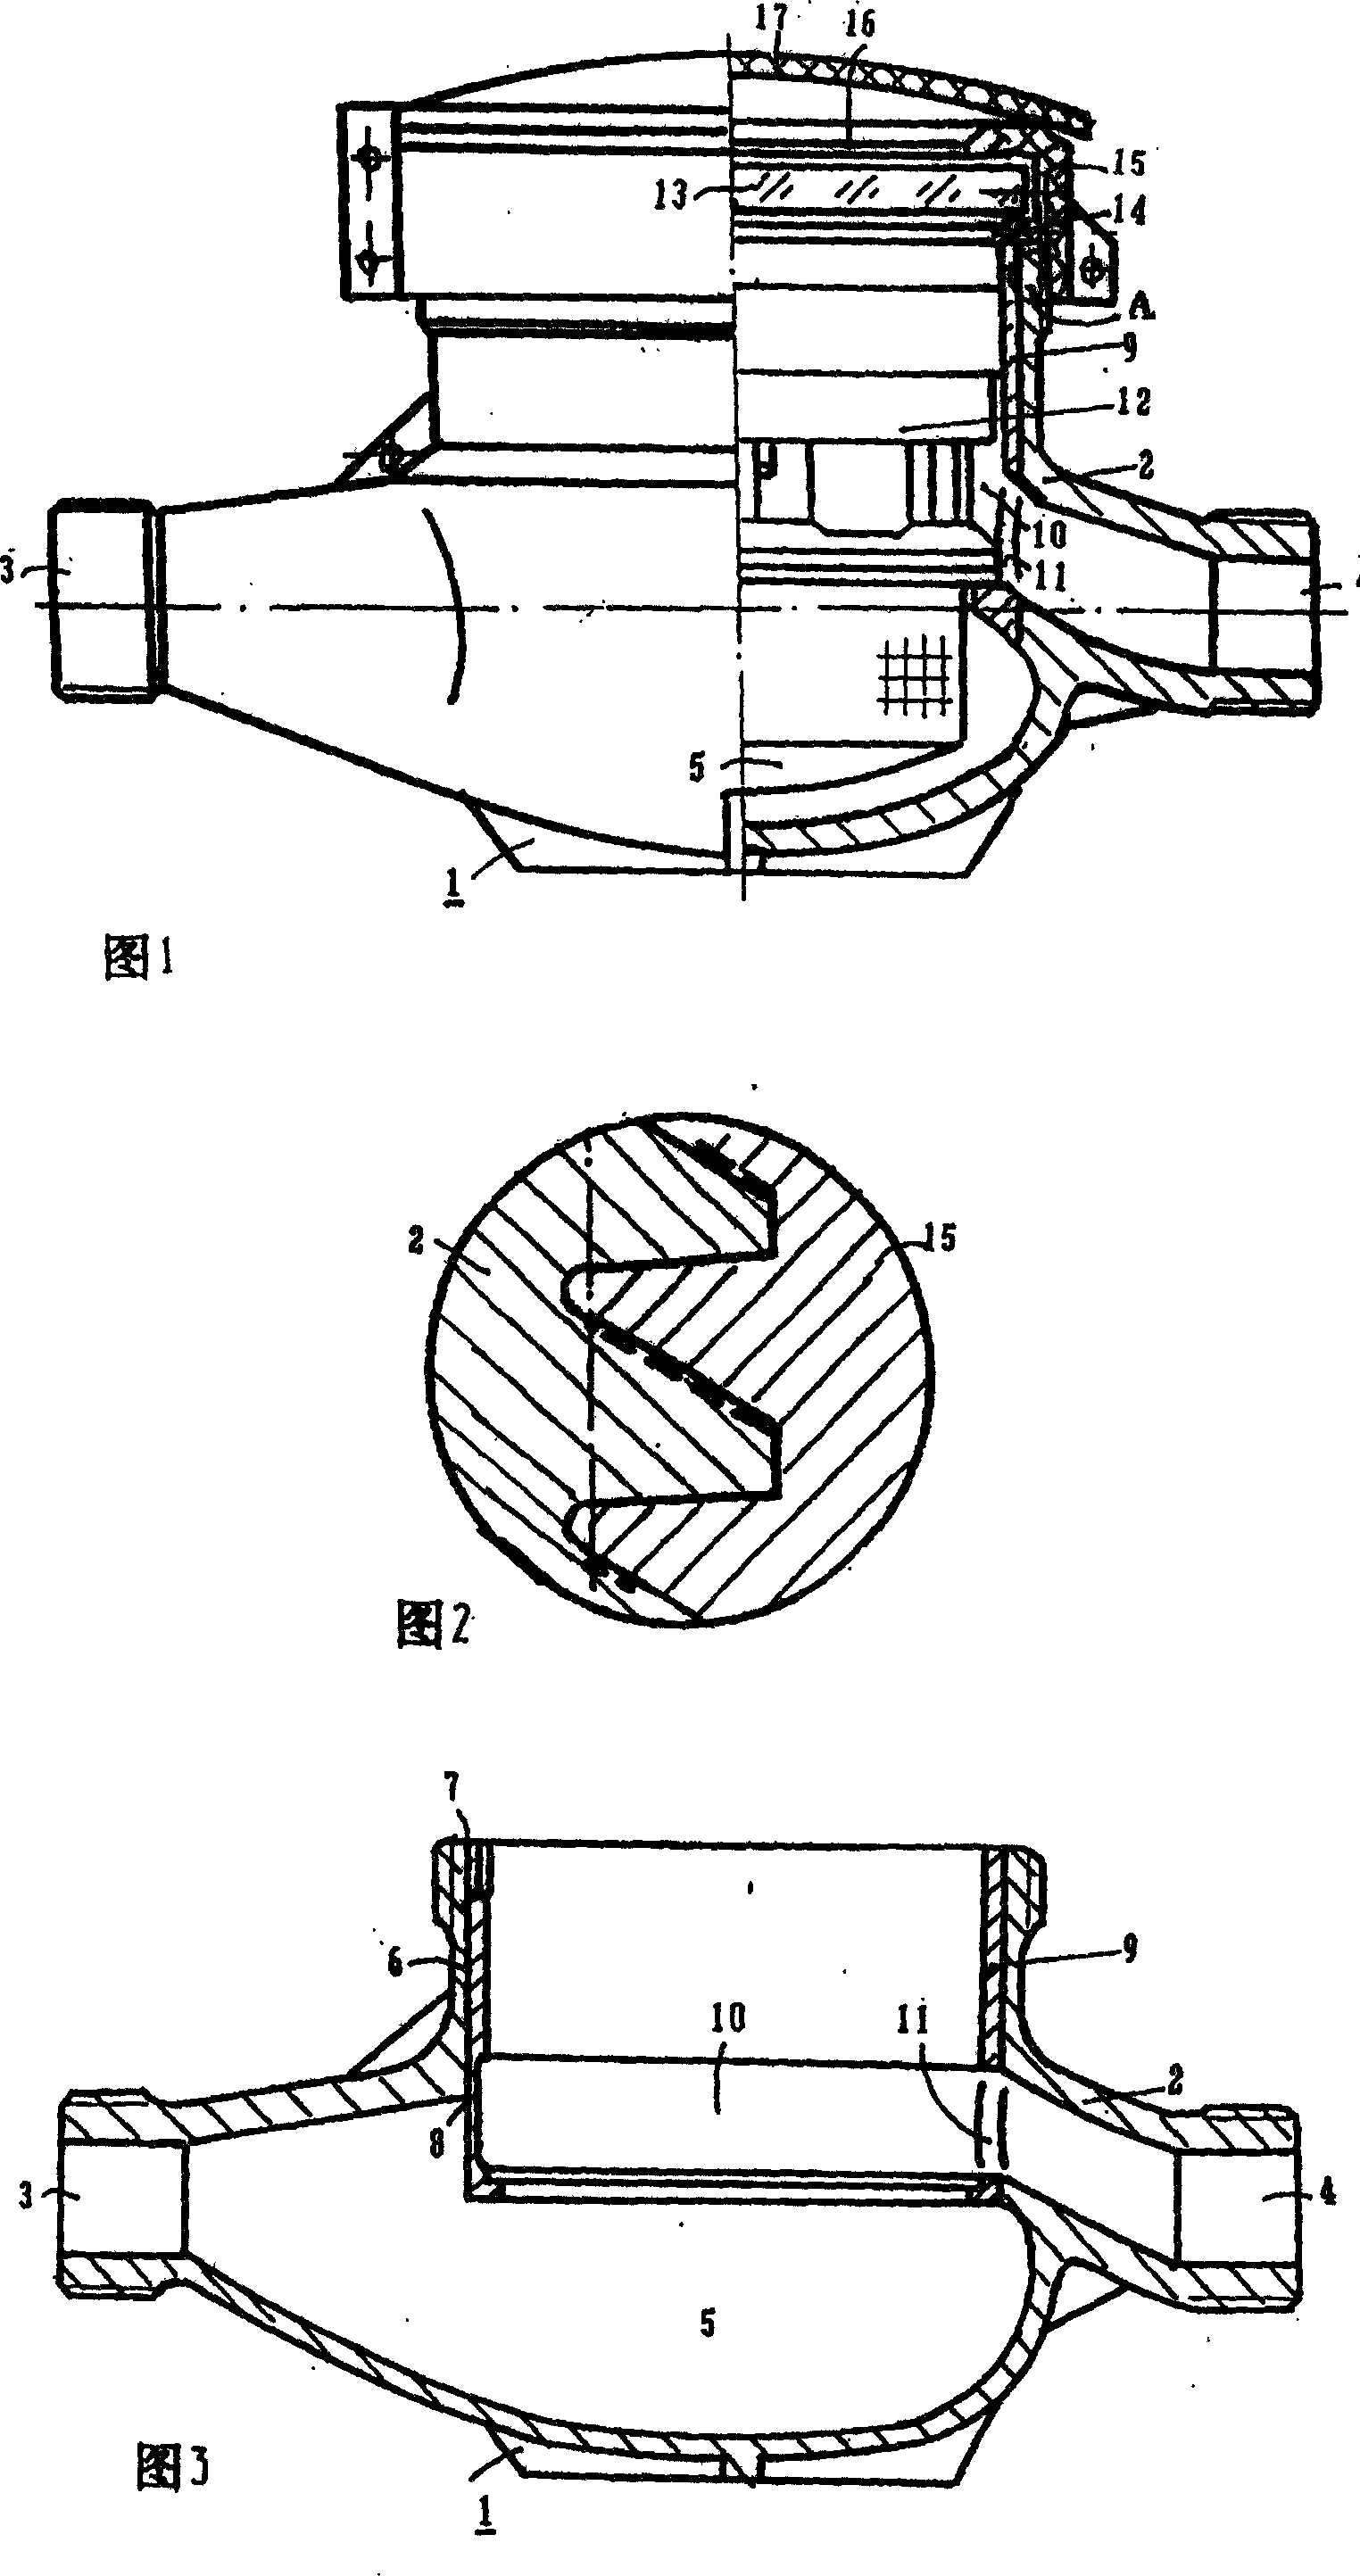 Shell structure of water meter